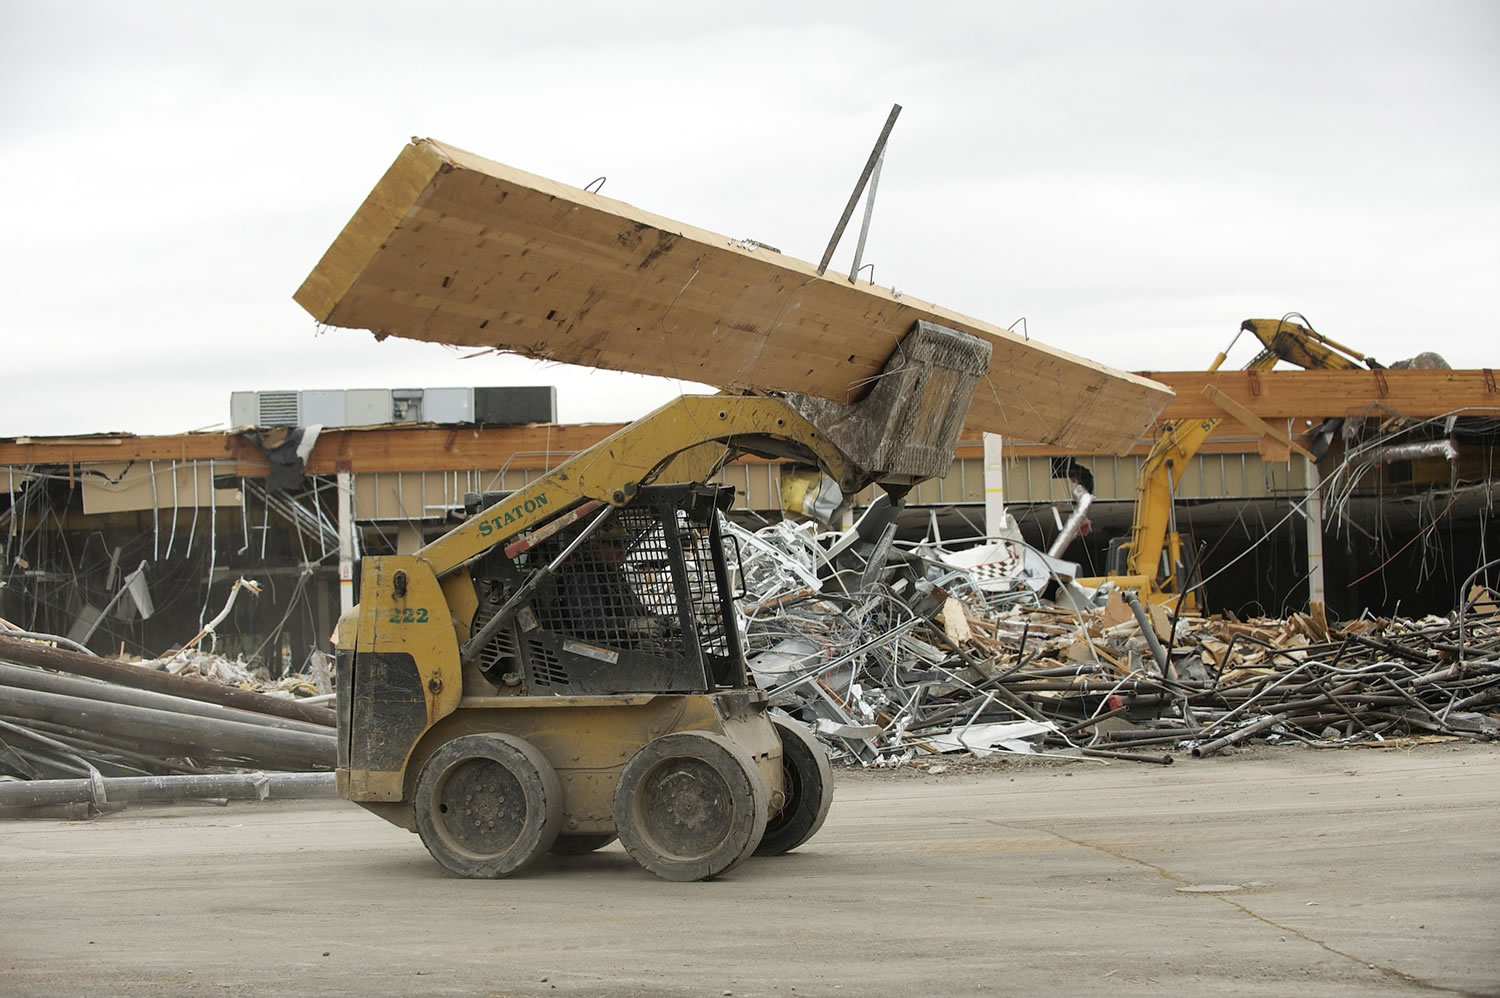 Crews from Staton Co. work to demolish the old Fred Meyer store at Grand and Fourth Plain boulevards to make way for a proposed grocery store that has not been identified so far. Fred Meyer vacated the store in 2008.